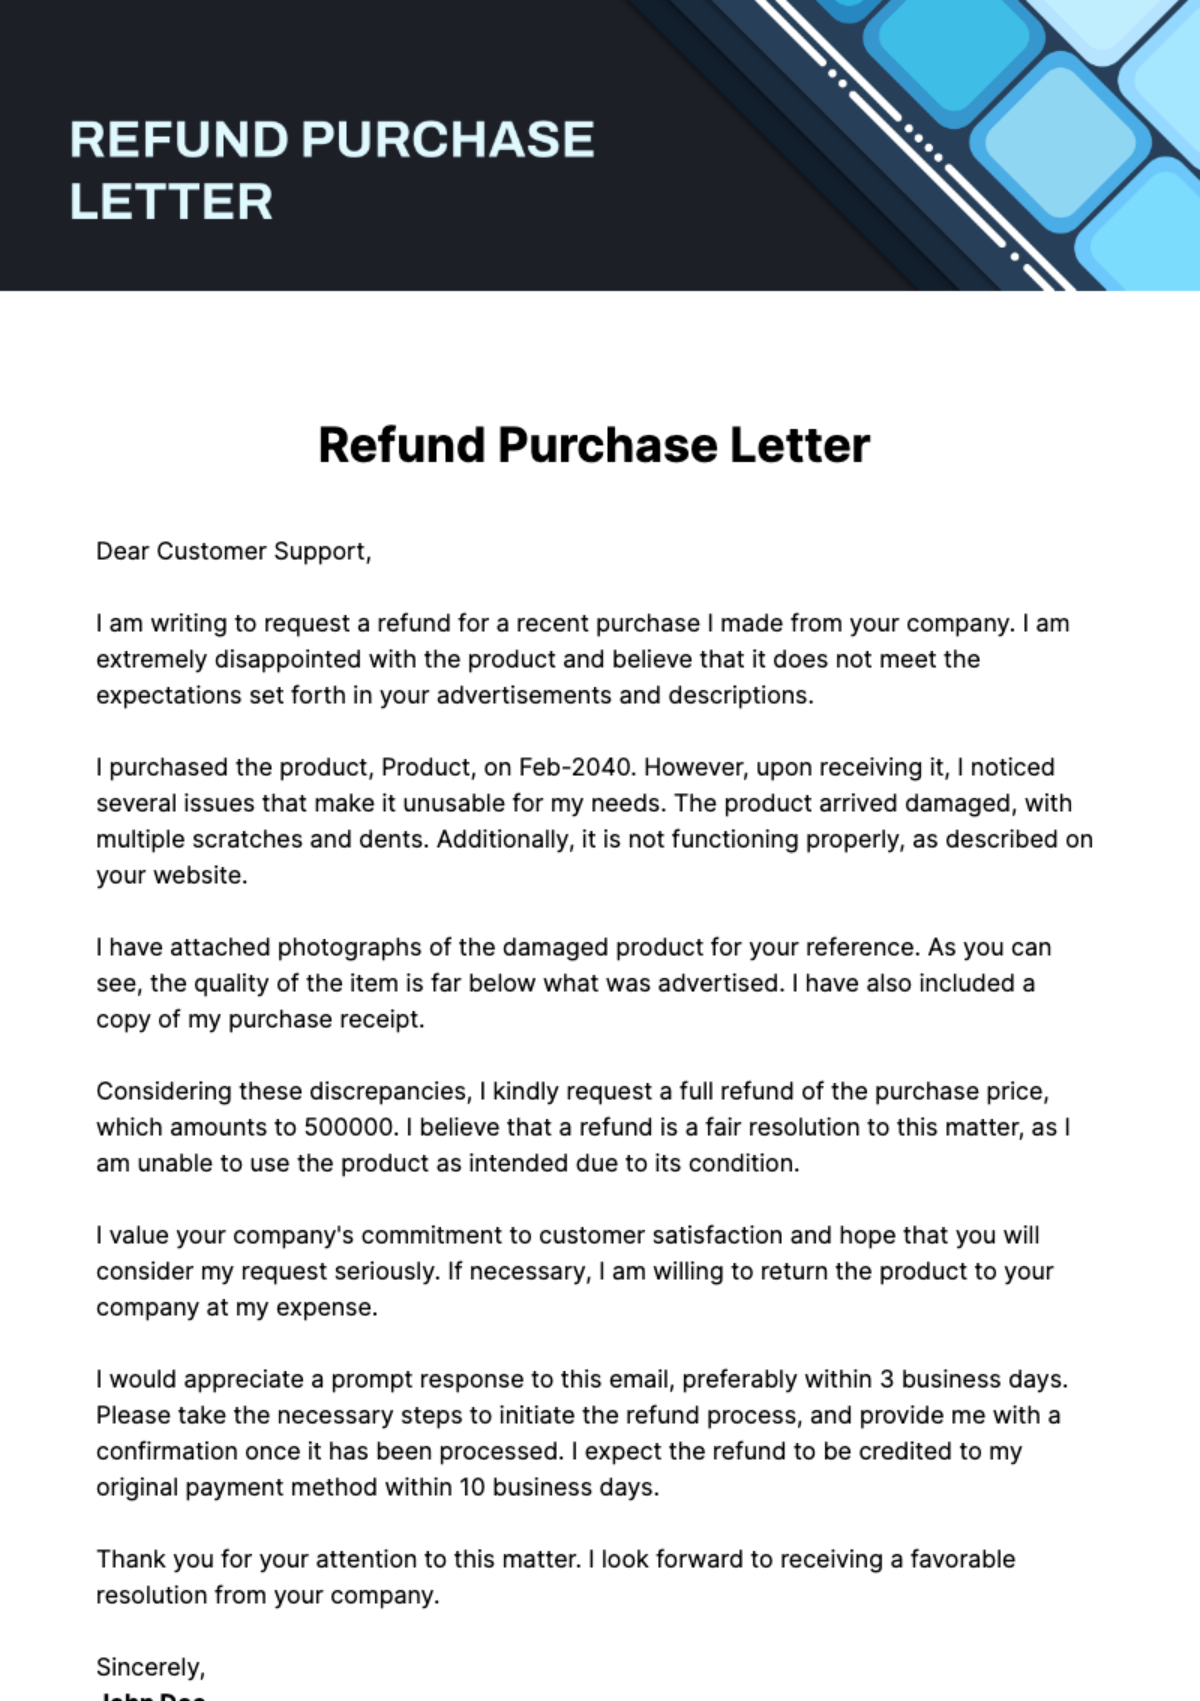 Free Refund Purchase Letter Template